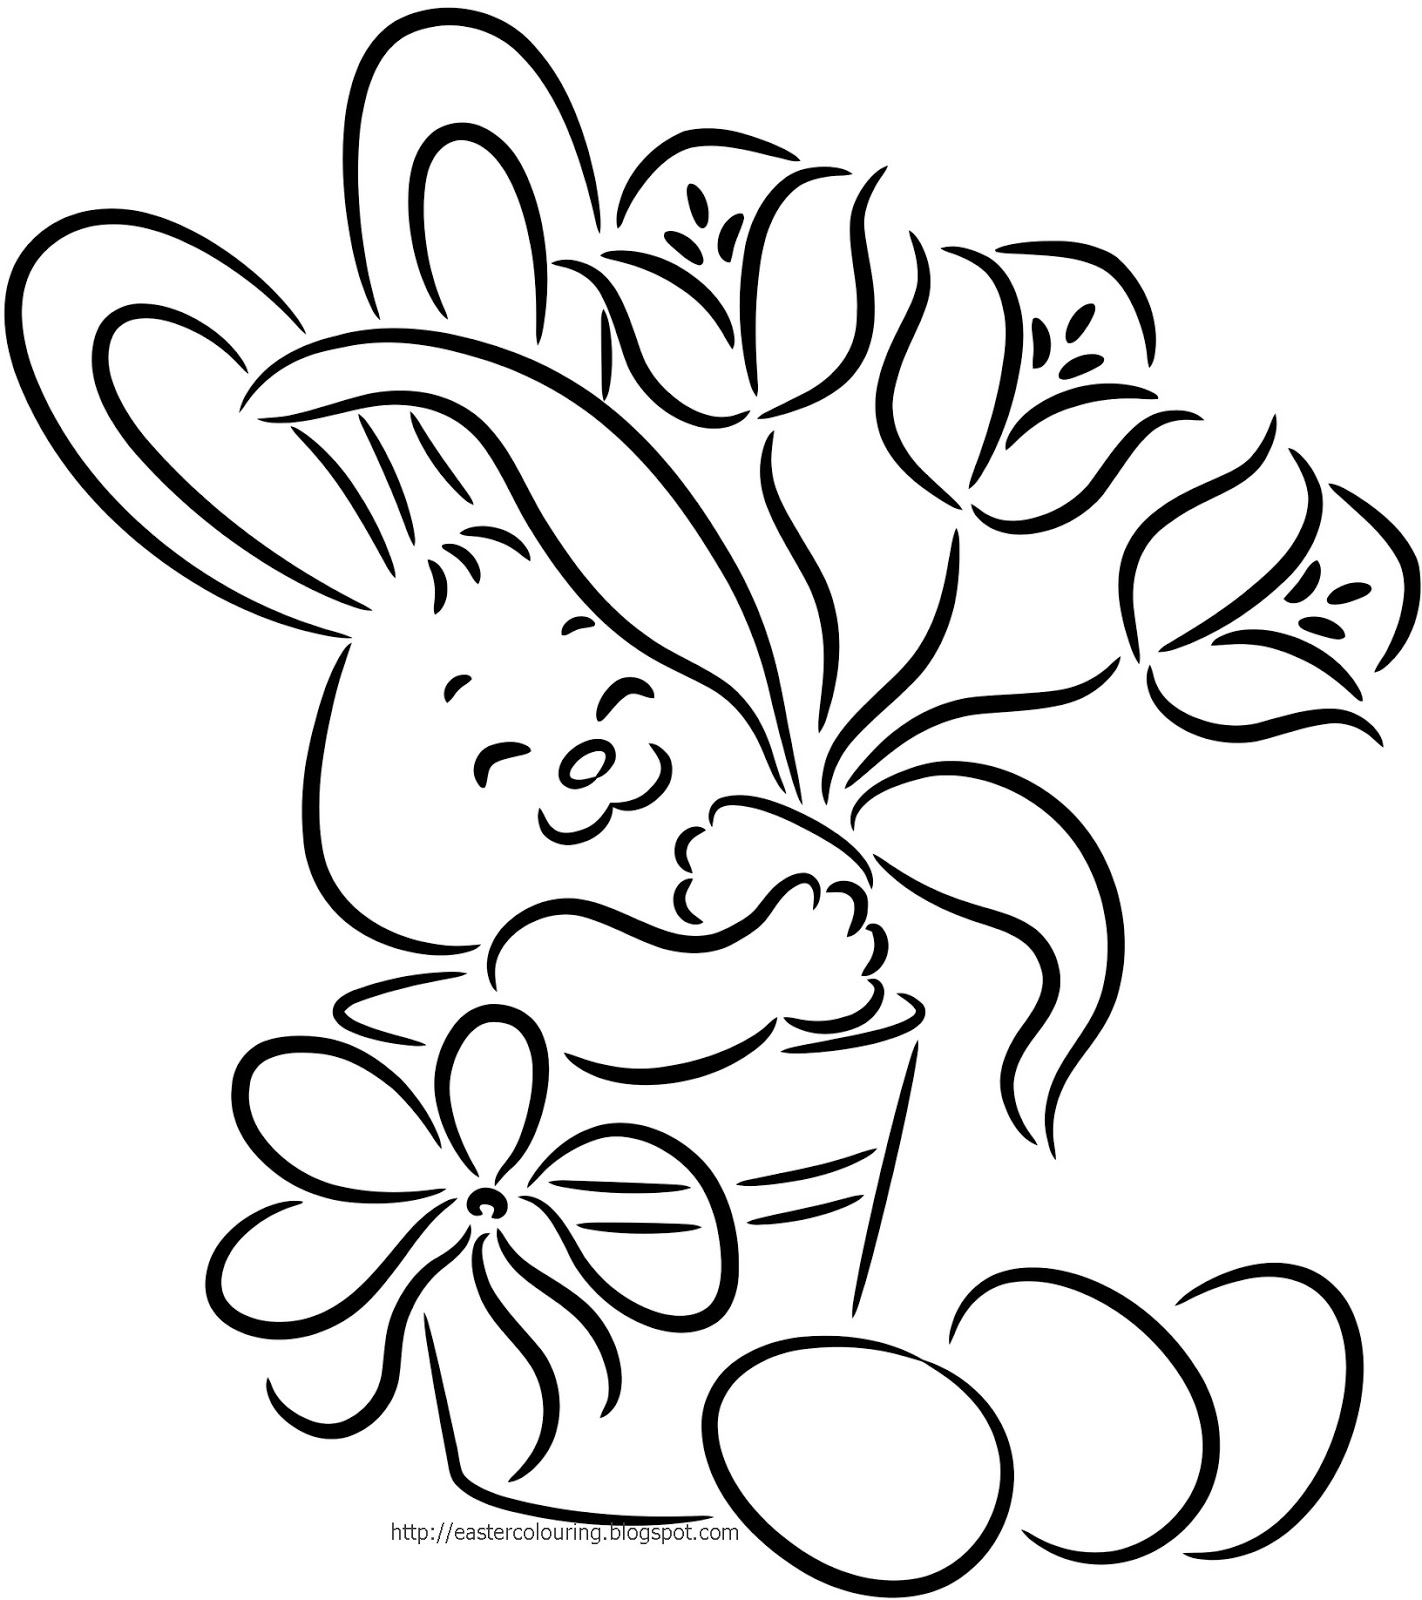 Download EASTER COLOURING